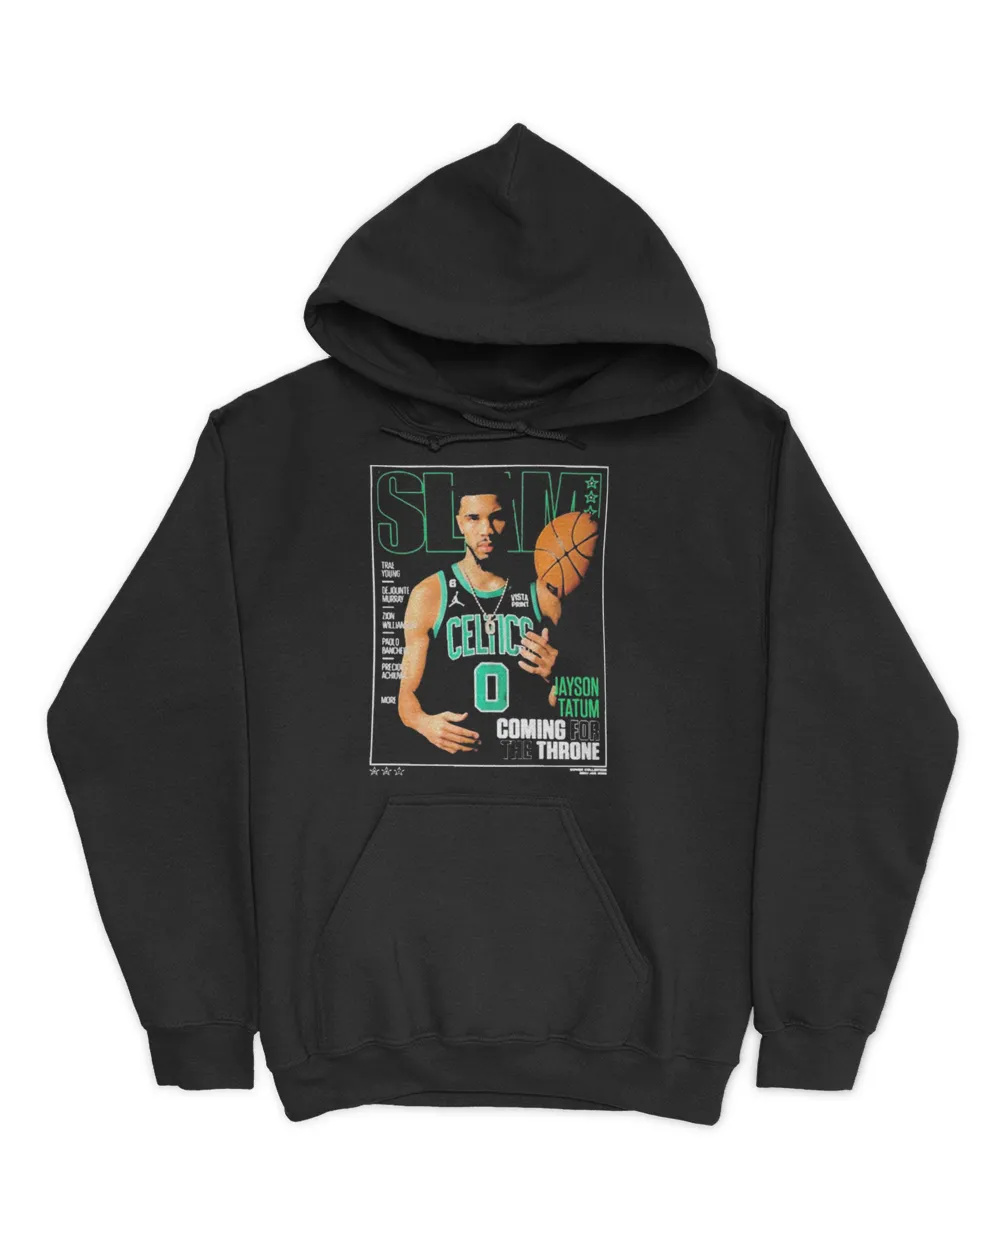 Alam jayson tatum coming for the throne T-shirt